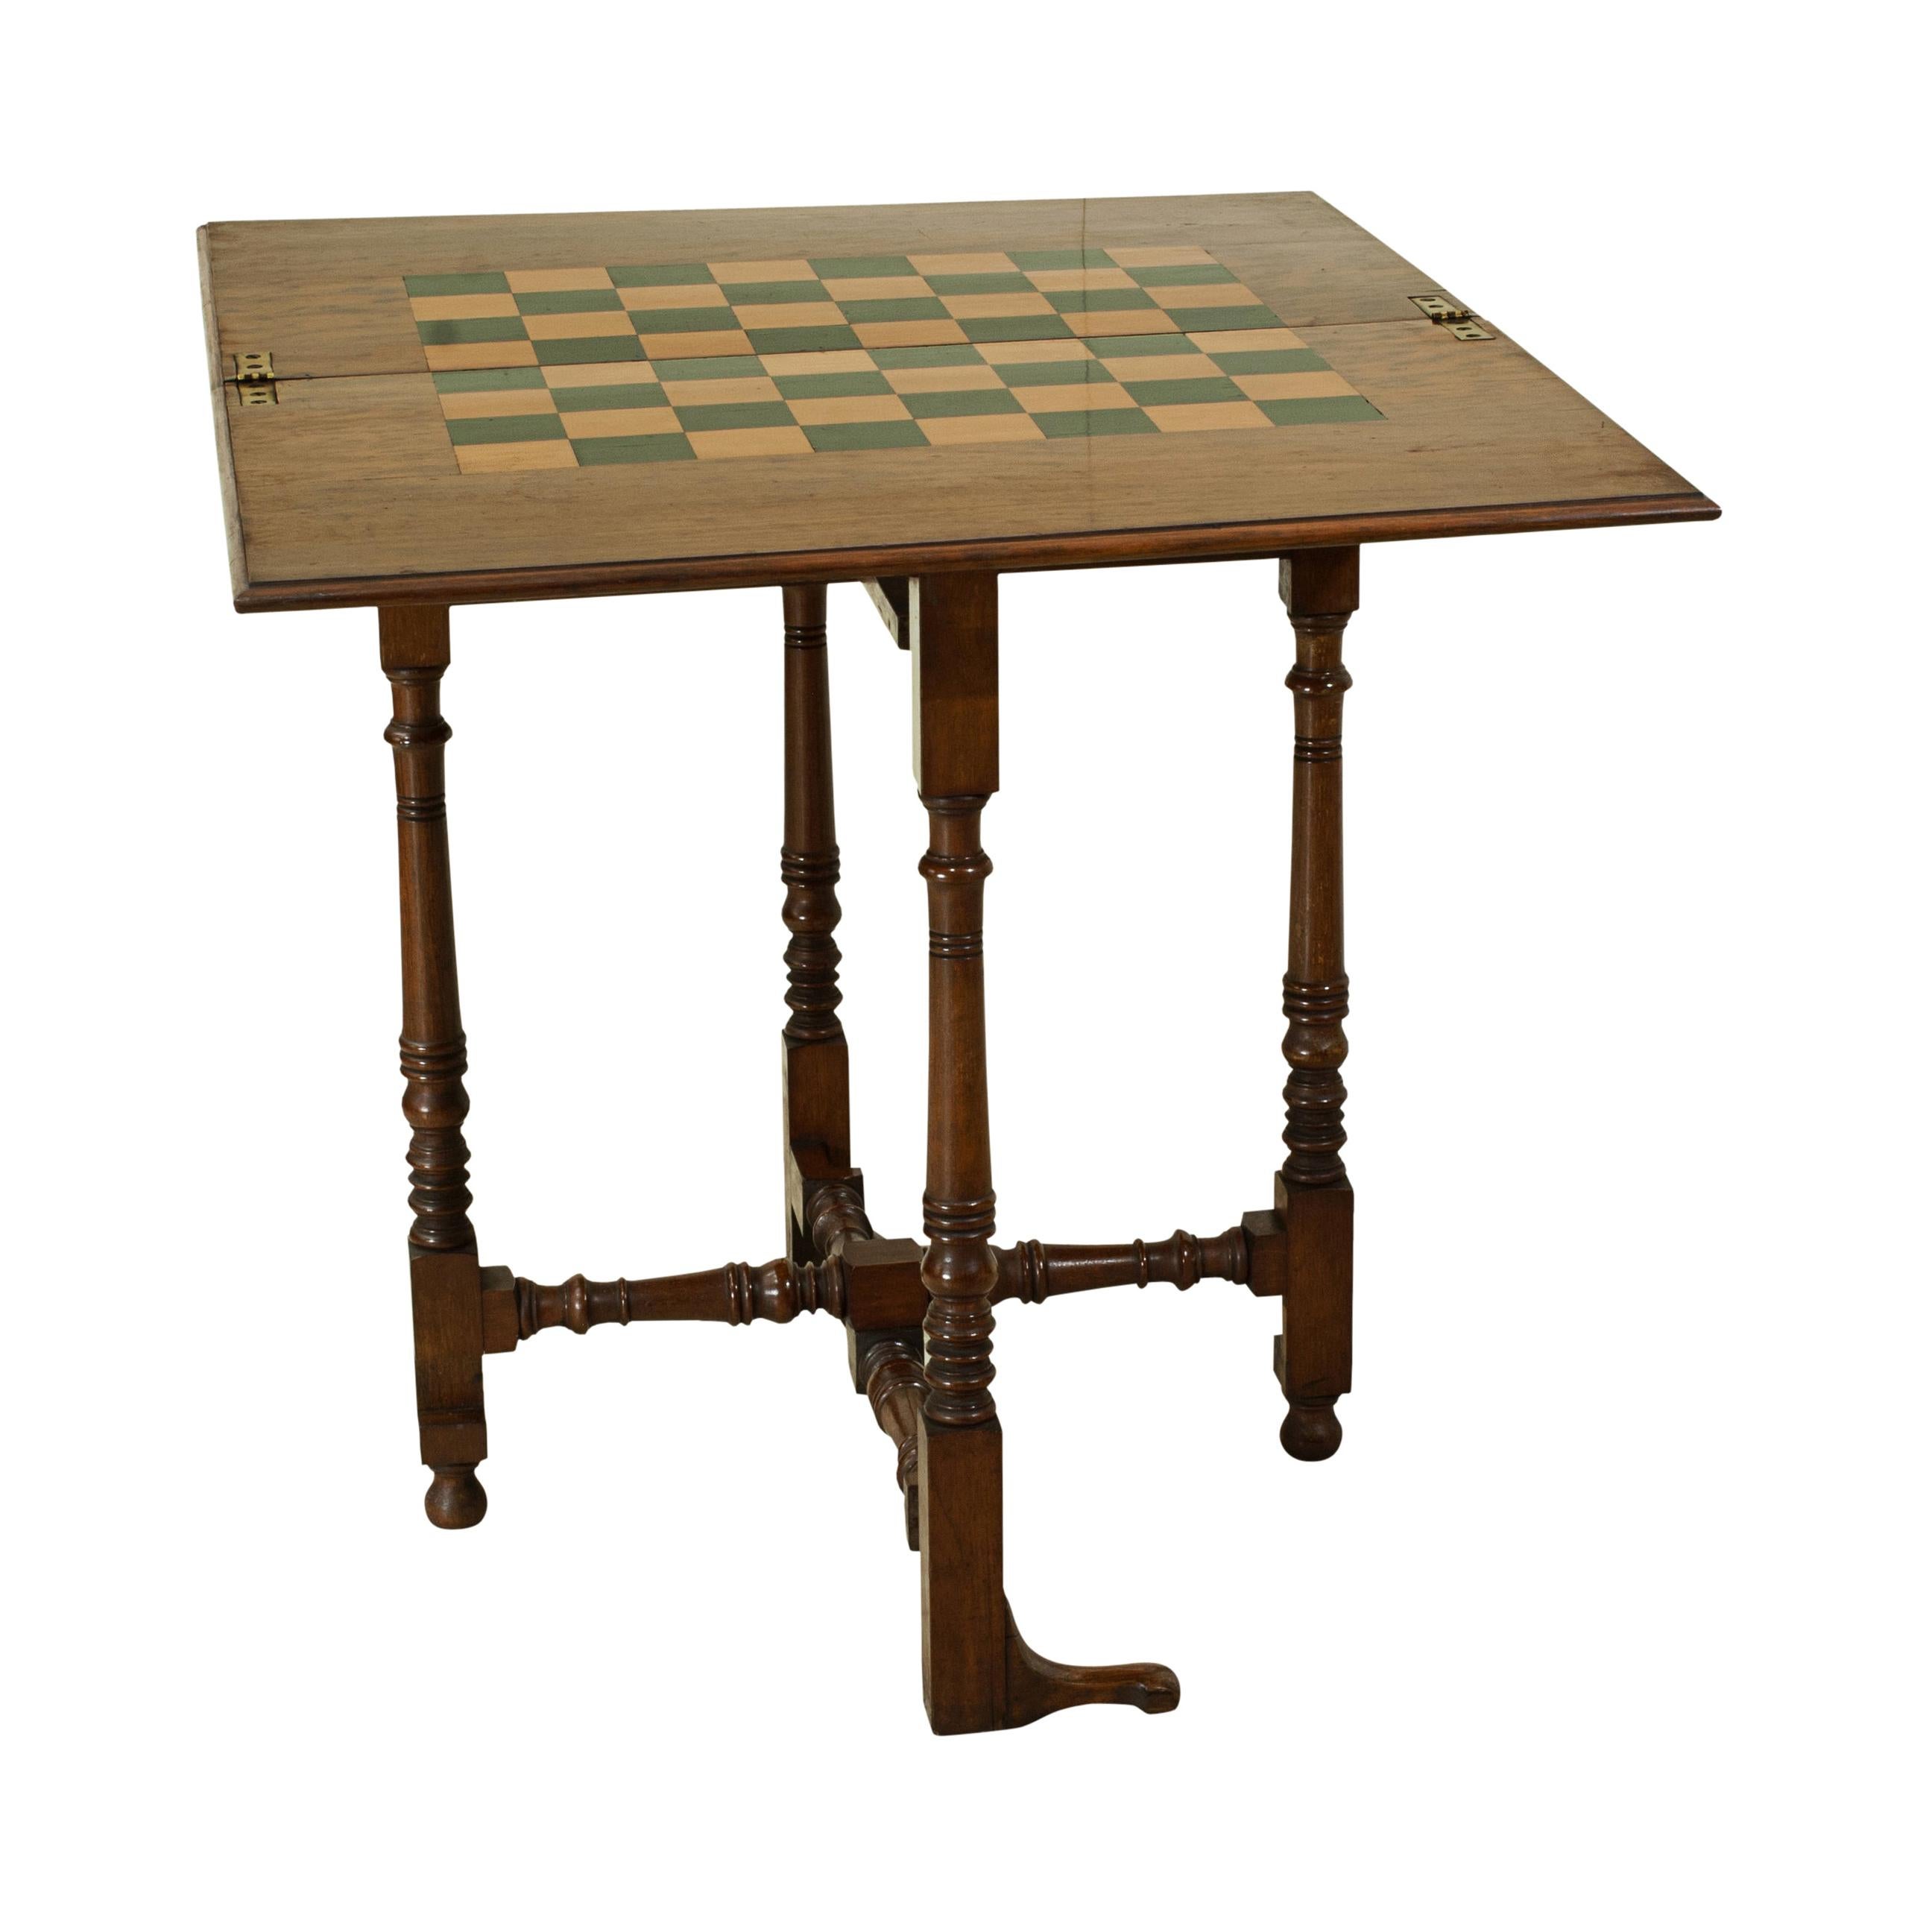 Victorian Folding Chess and Draughts Table